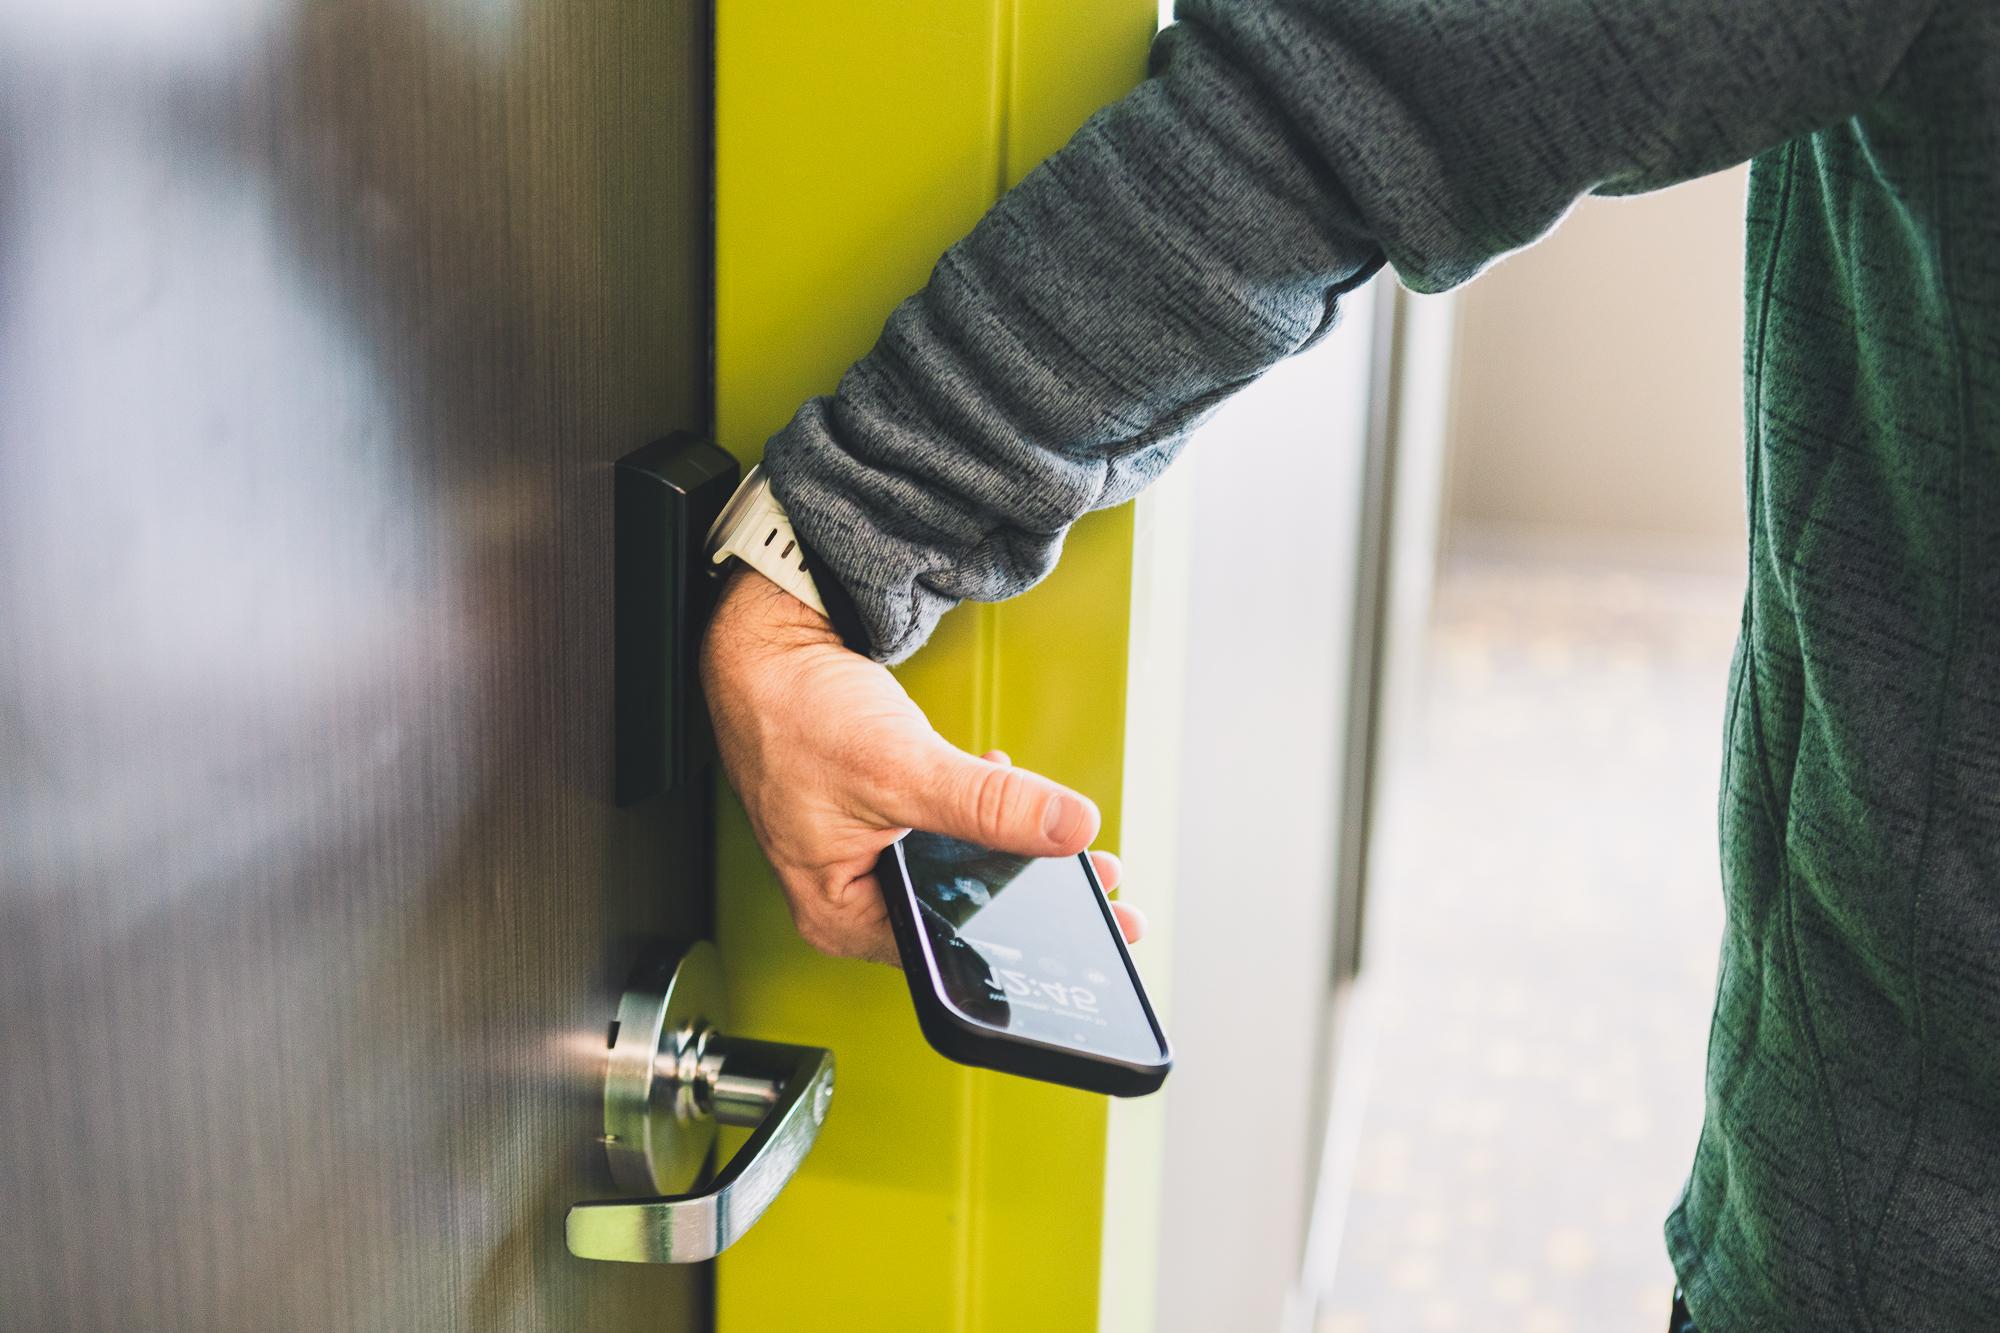 The New Hall is the first building on campus to feature electronic key entry. A man demonstrates how he uses his Apple Watch to unlock a door by placing it against a pad above the door handle.